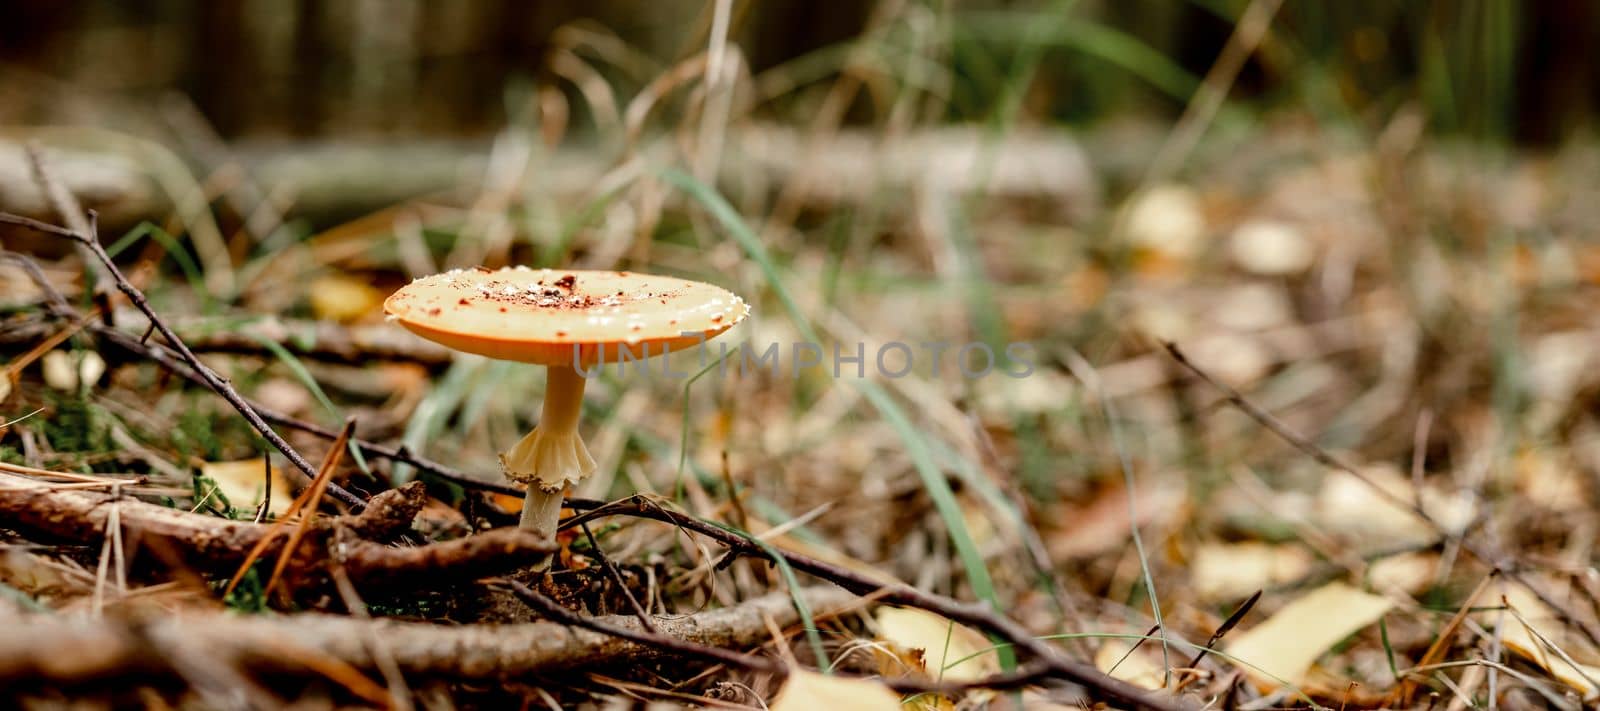 Forest mushrooms in the grass by tan4ikk1